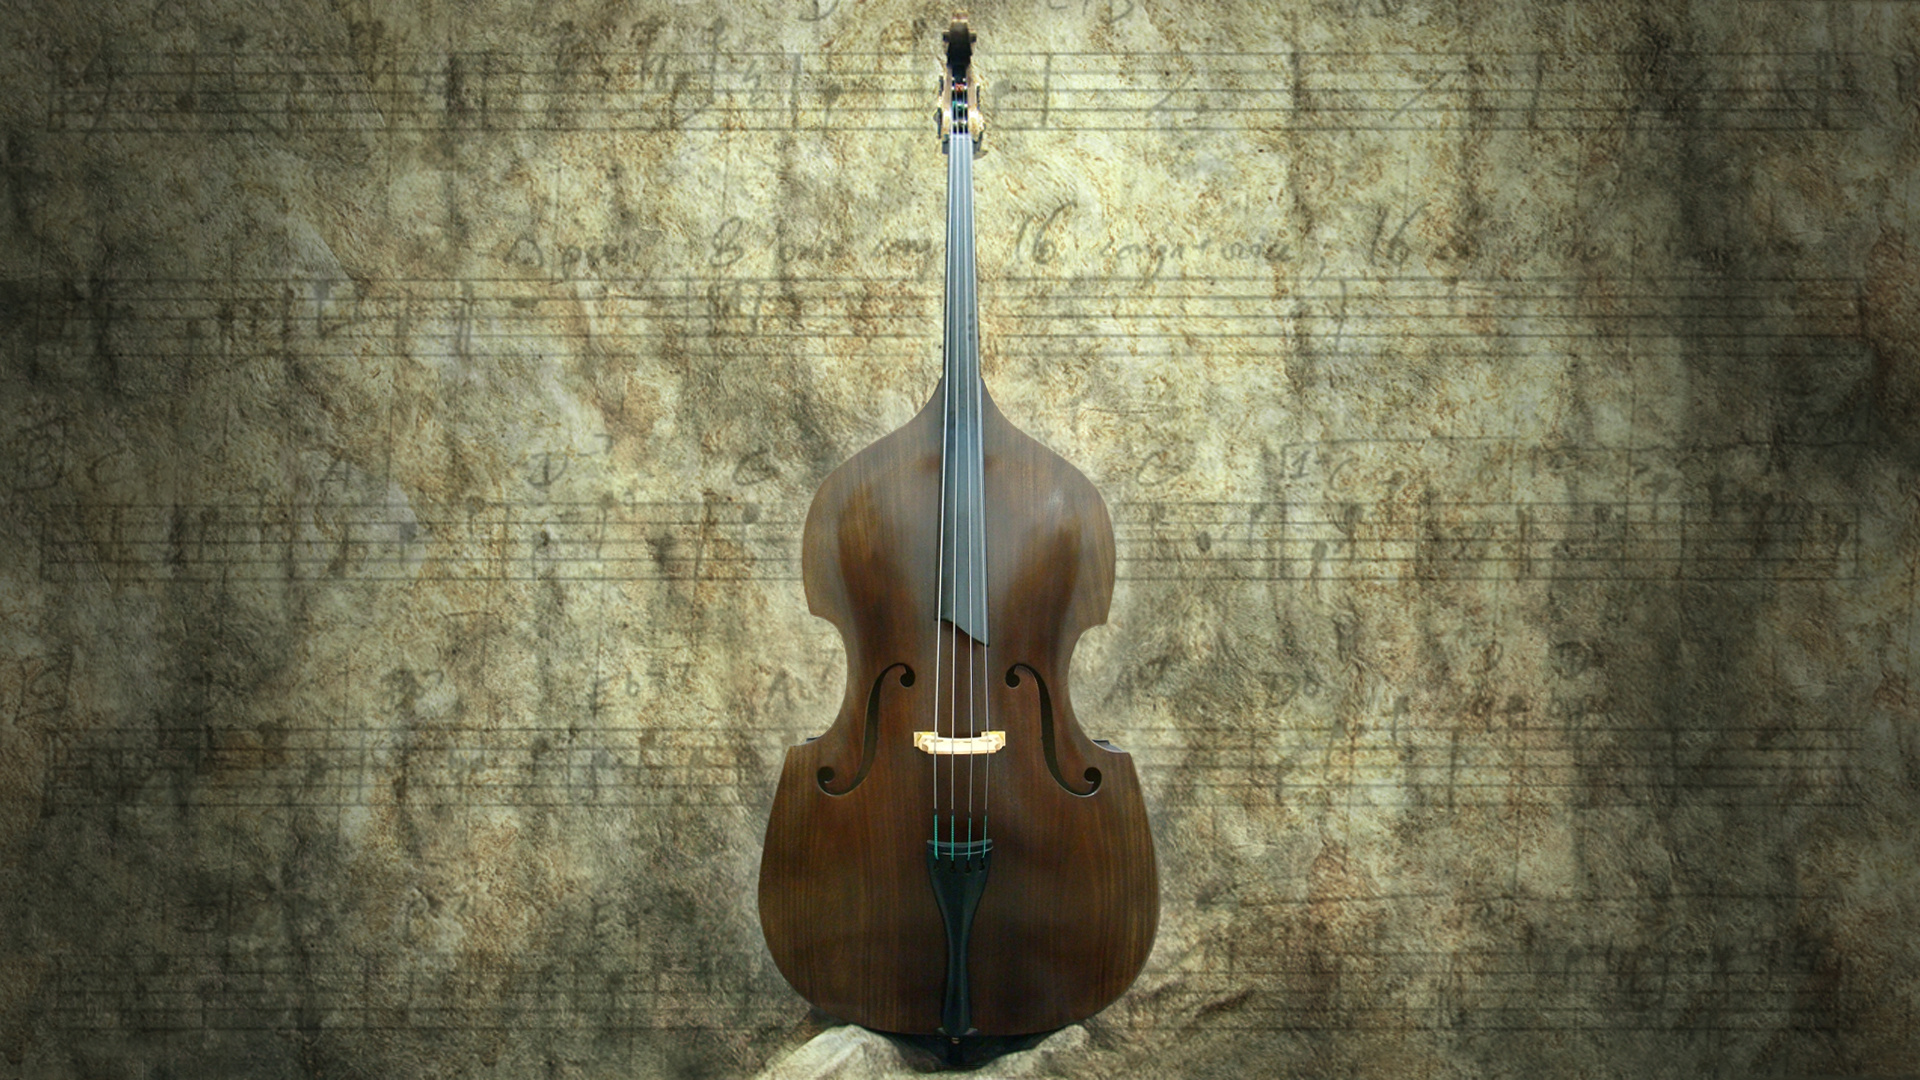 Double Bass: Upper Bout, Lower Bout, C-Bout, Tailpiece, F-Hole, Glossy Lacquered Surface, Pegbox, Tuning Pegs, Stringing, Chord. 1920x1080 Full HD Background.